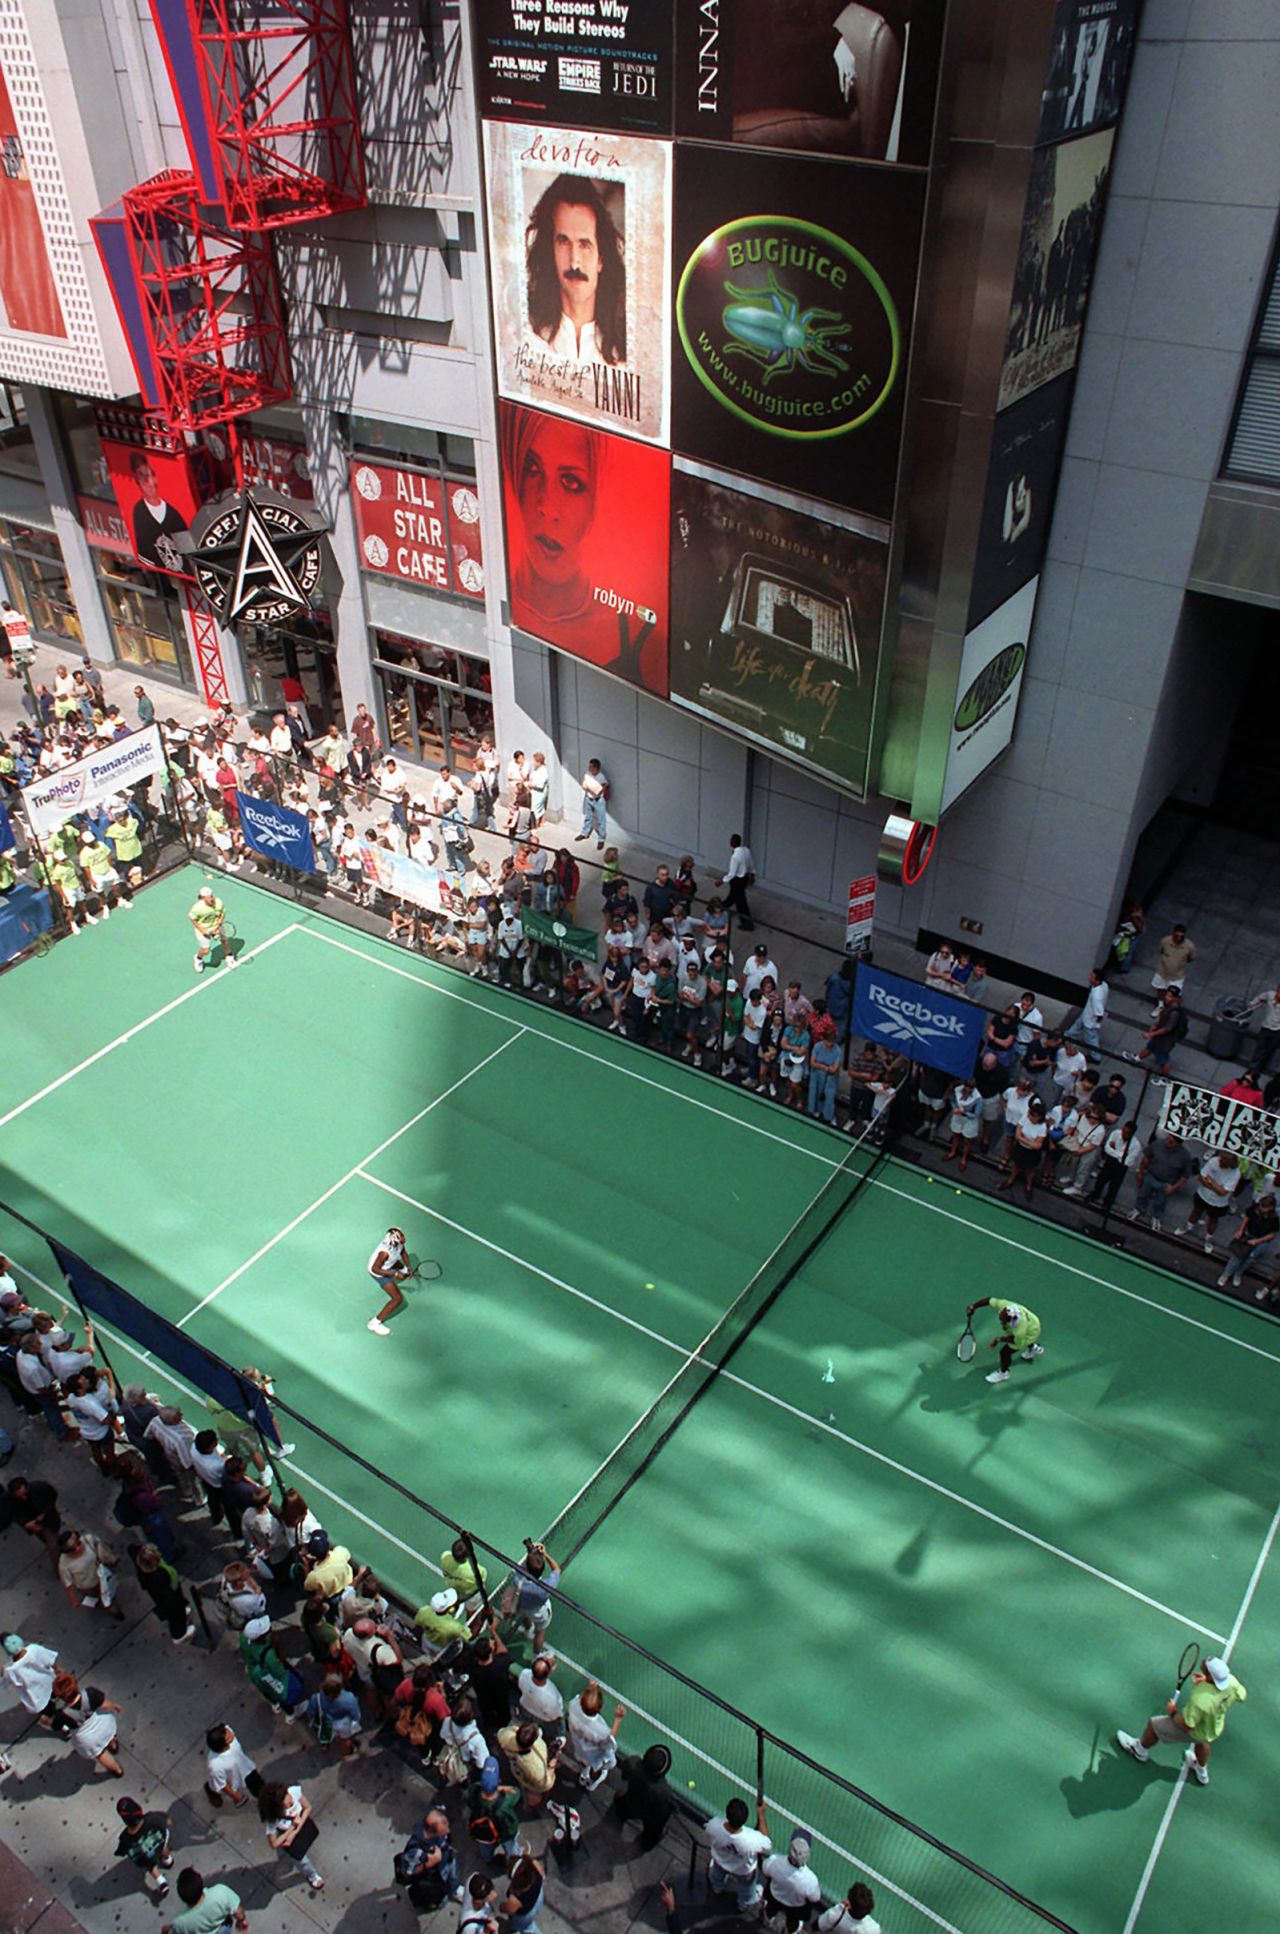 The Williams sisters and the Jensen brothers, Luke and Murphy, play an exhibition in New York's Times Square in 1997. It was part of the lead-up to the US Open.